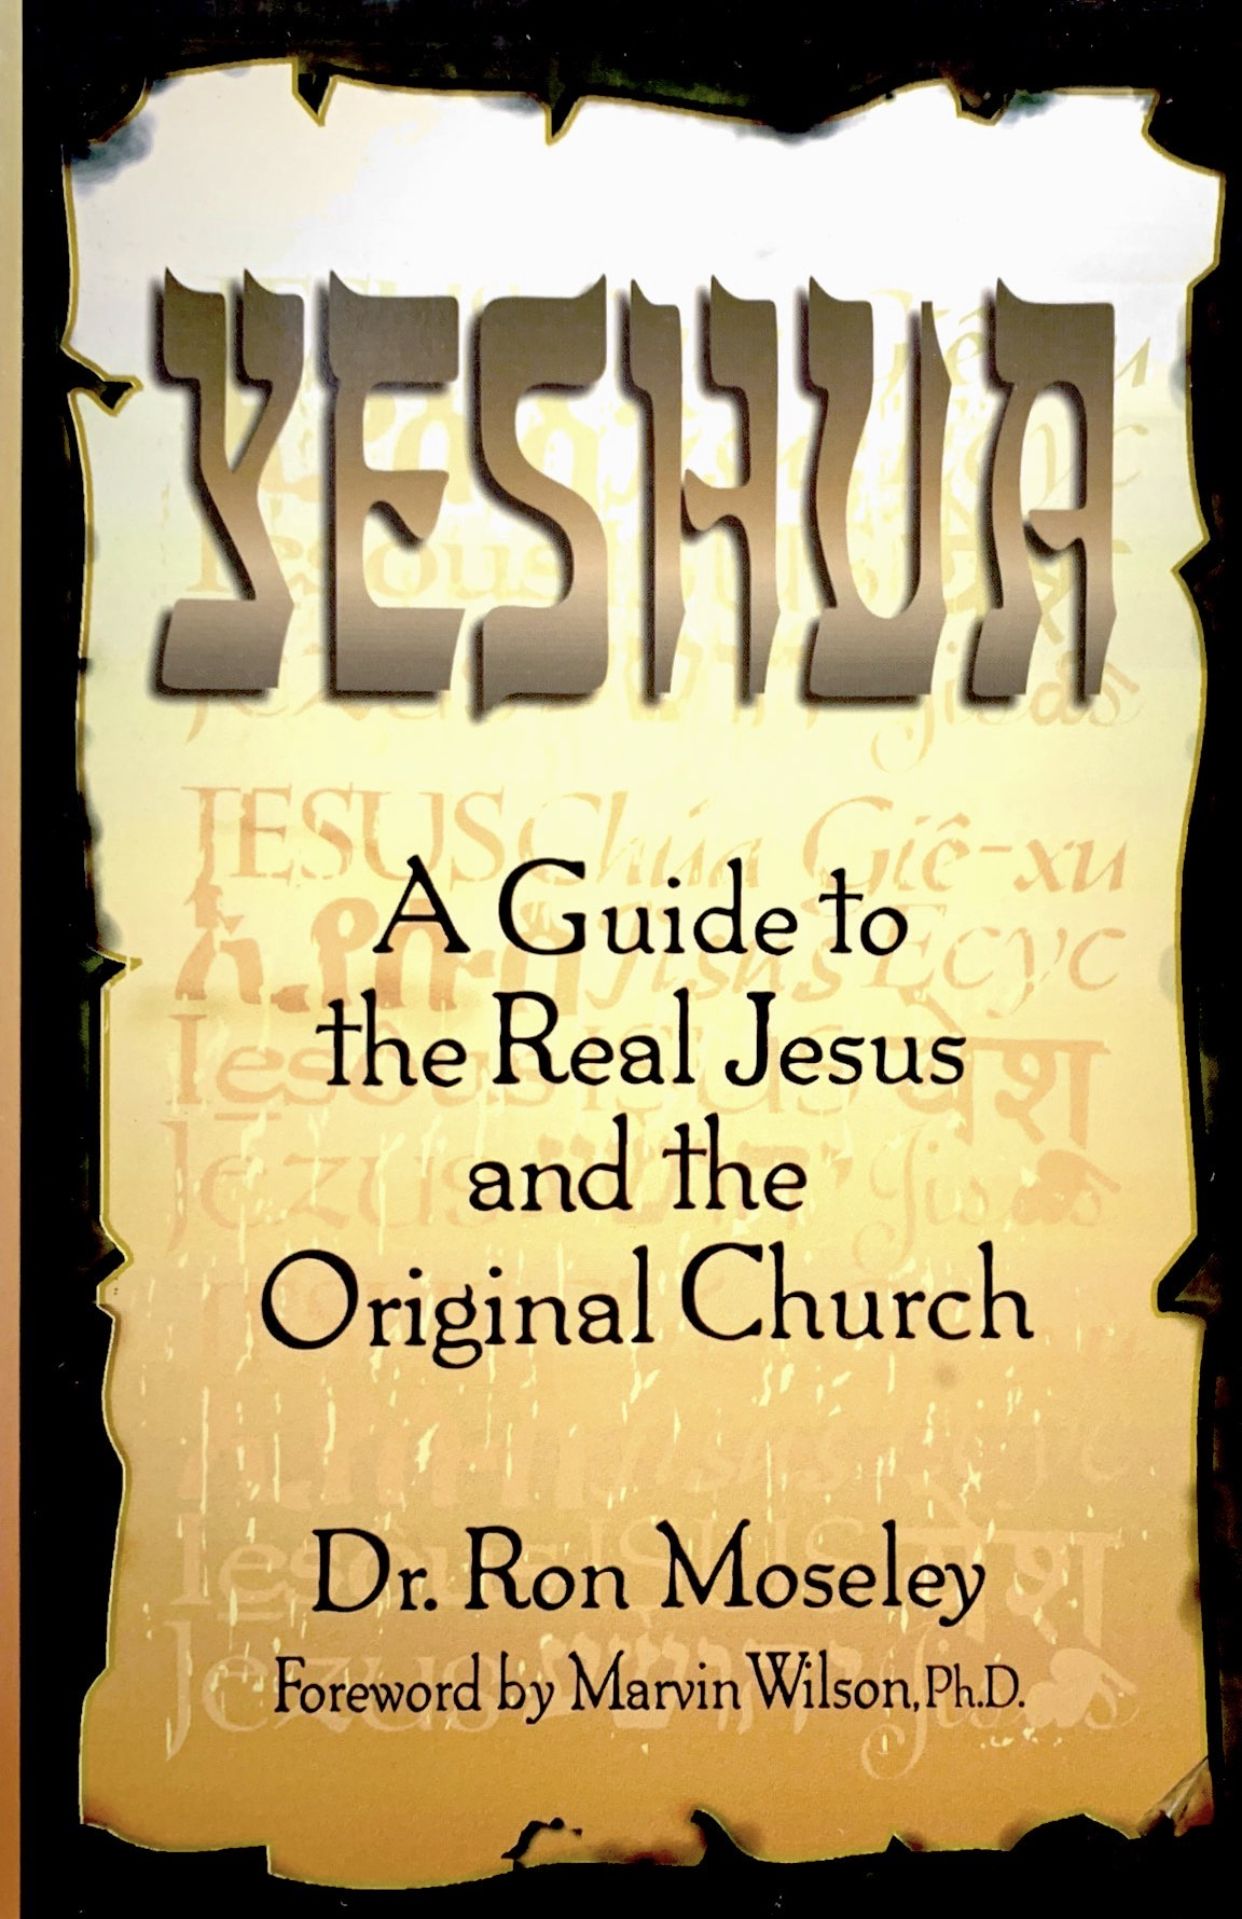 Cover of Yeshua